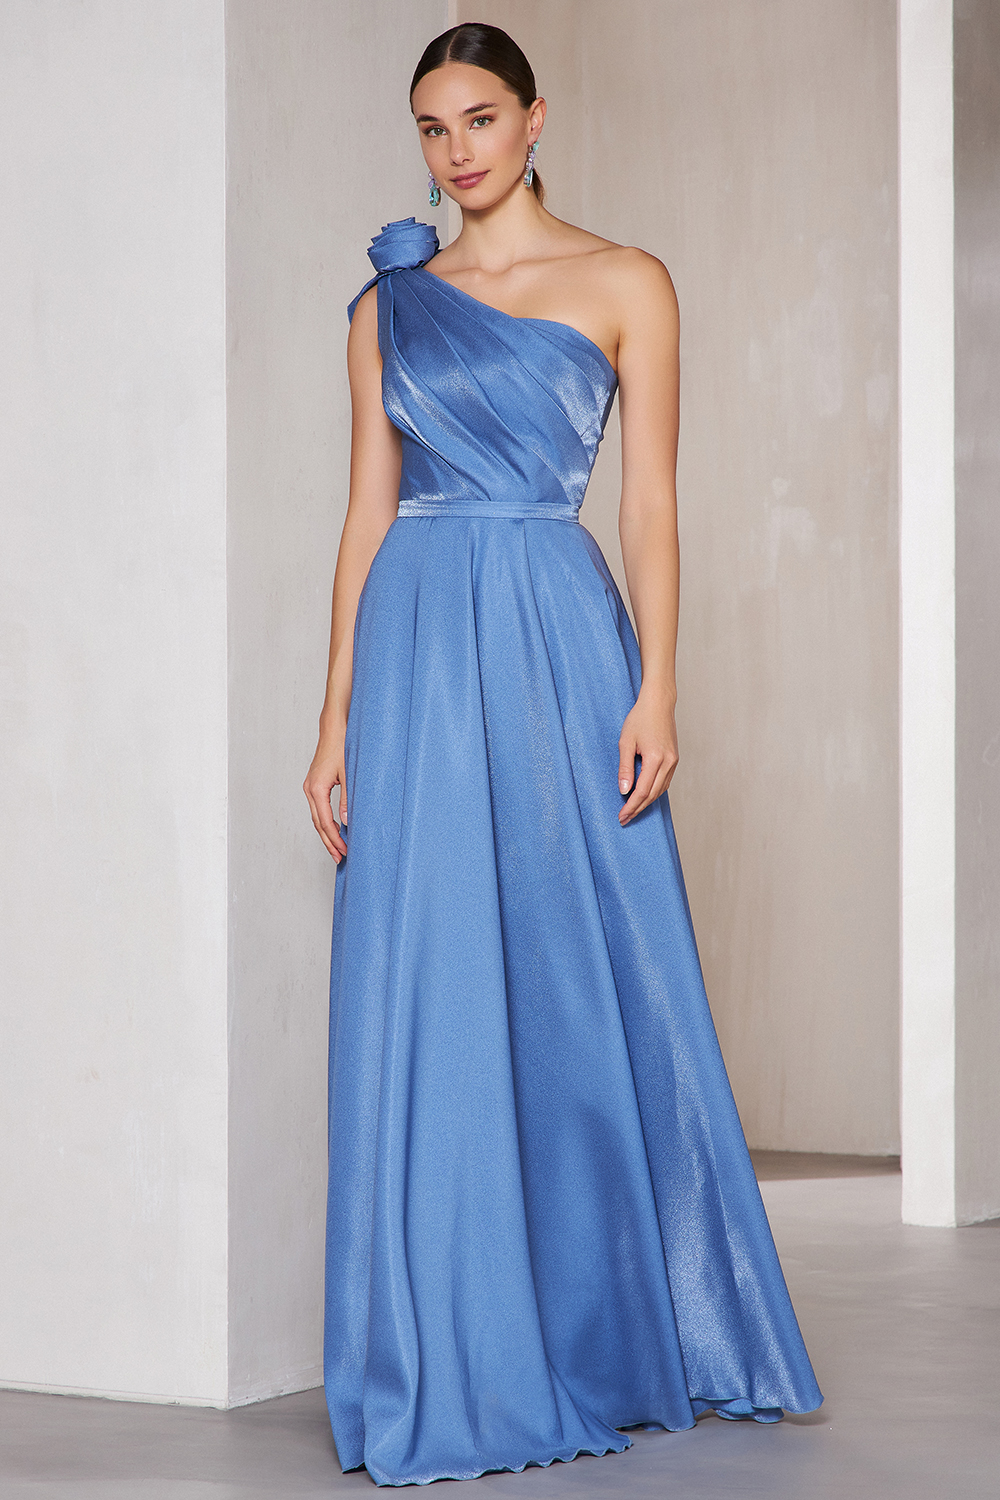 Evening Dresses / One shoulder evening dress with shining fabric